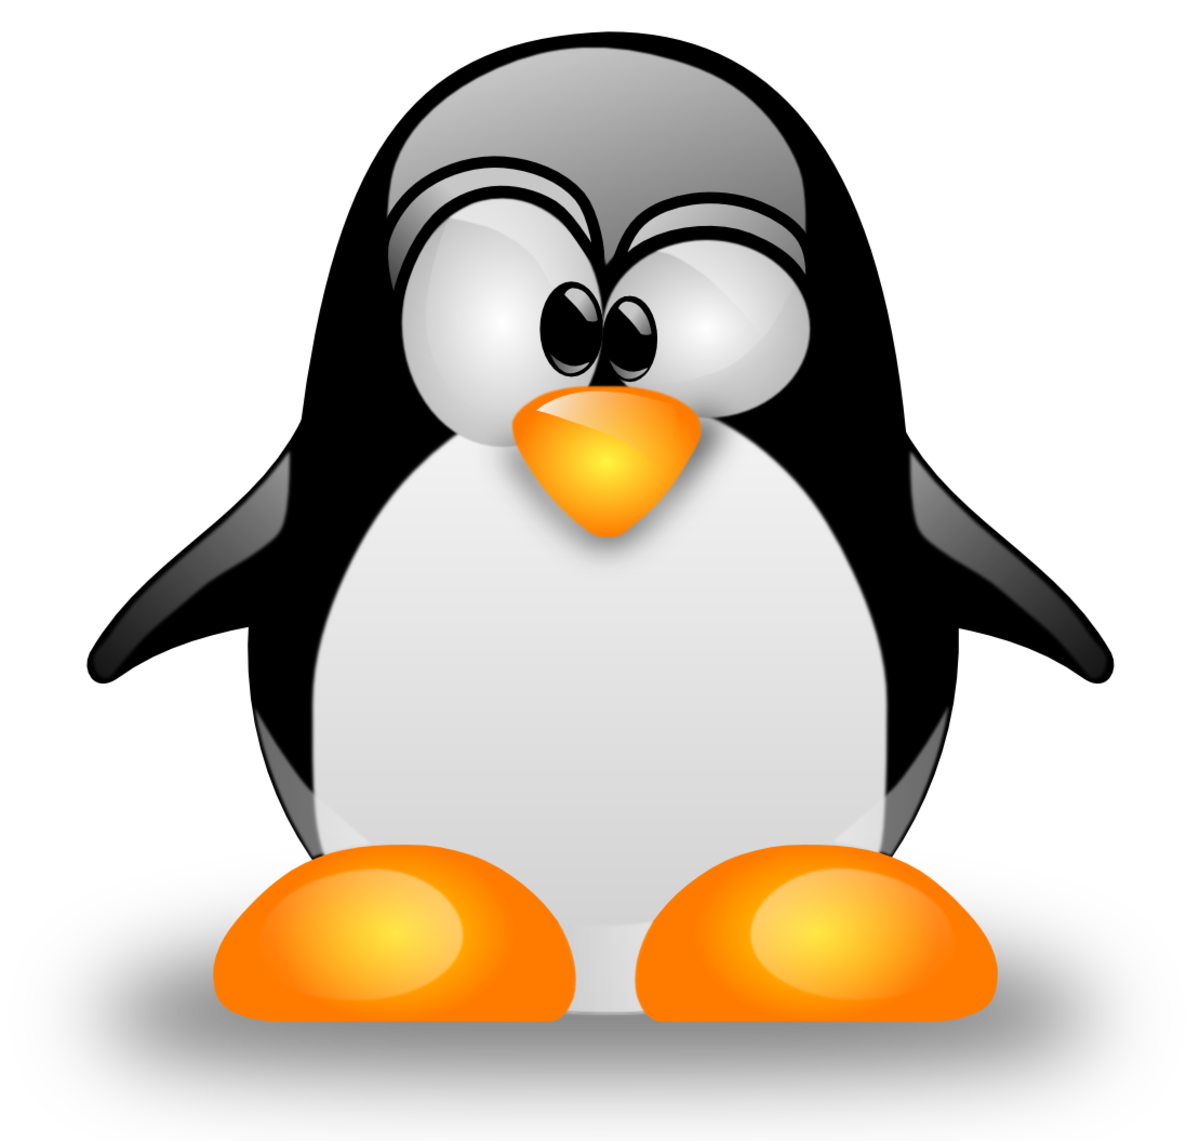 A Beginner's Guide to Free Linux Operating Systems